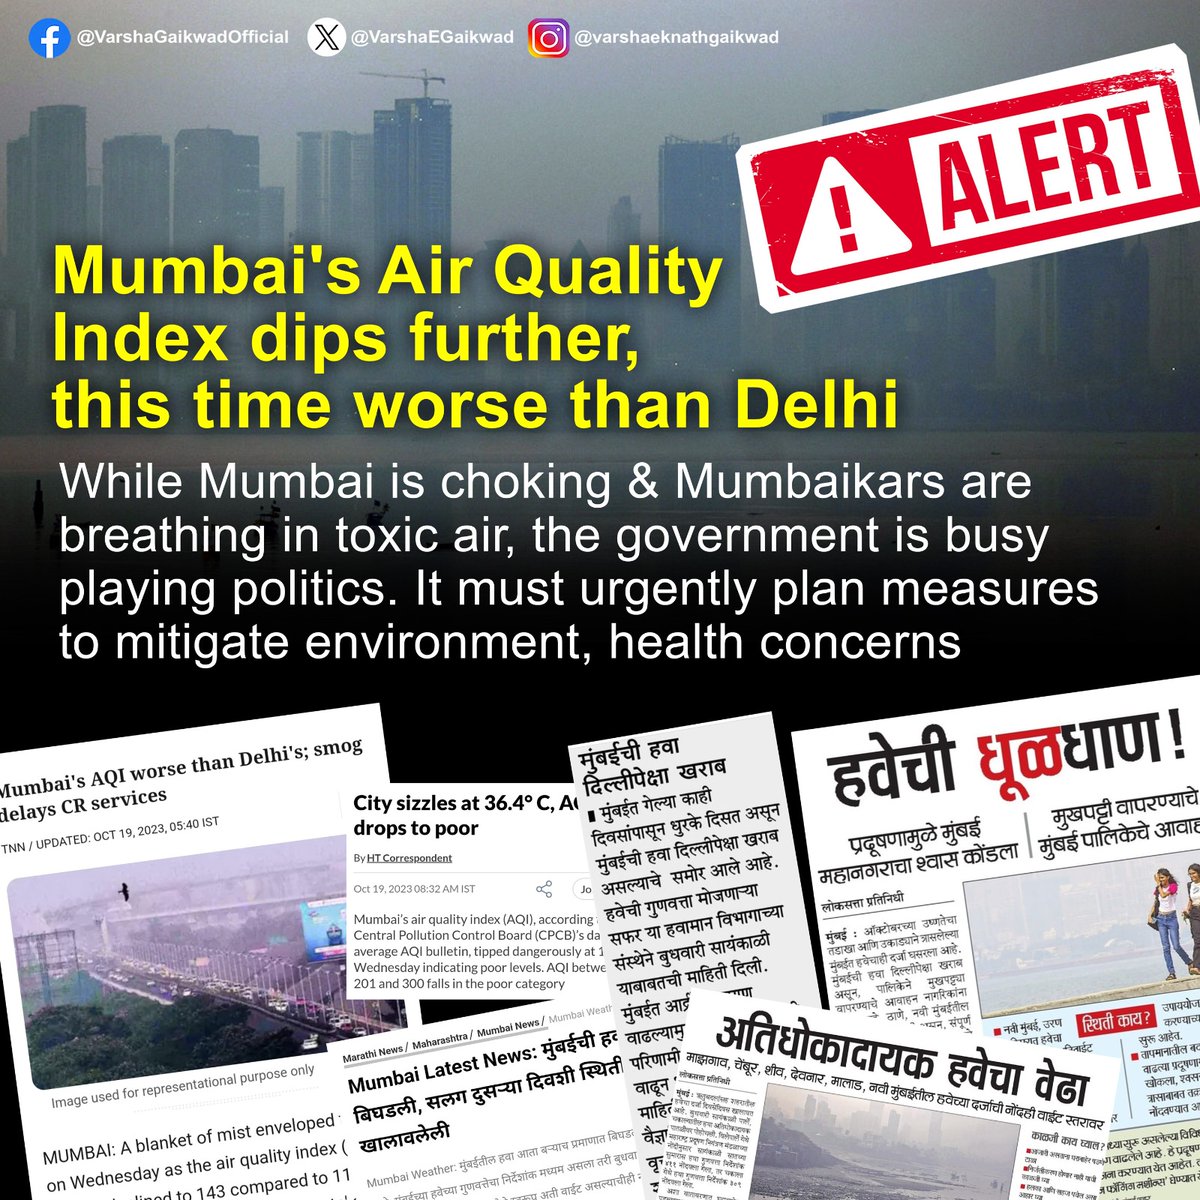 Reupping my October 17th post, as Mumbai's #AirQuality has worsened further & demands urgent attention.

Mumbaikars are breathing in #toxicair. Those in power must shun petty politics and urgently plan measures to mitigate environment, health concerns.

Our demands: 

1) Research